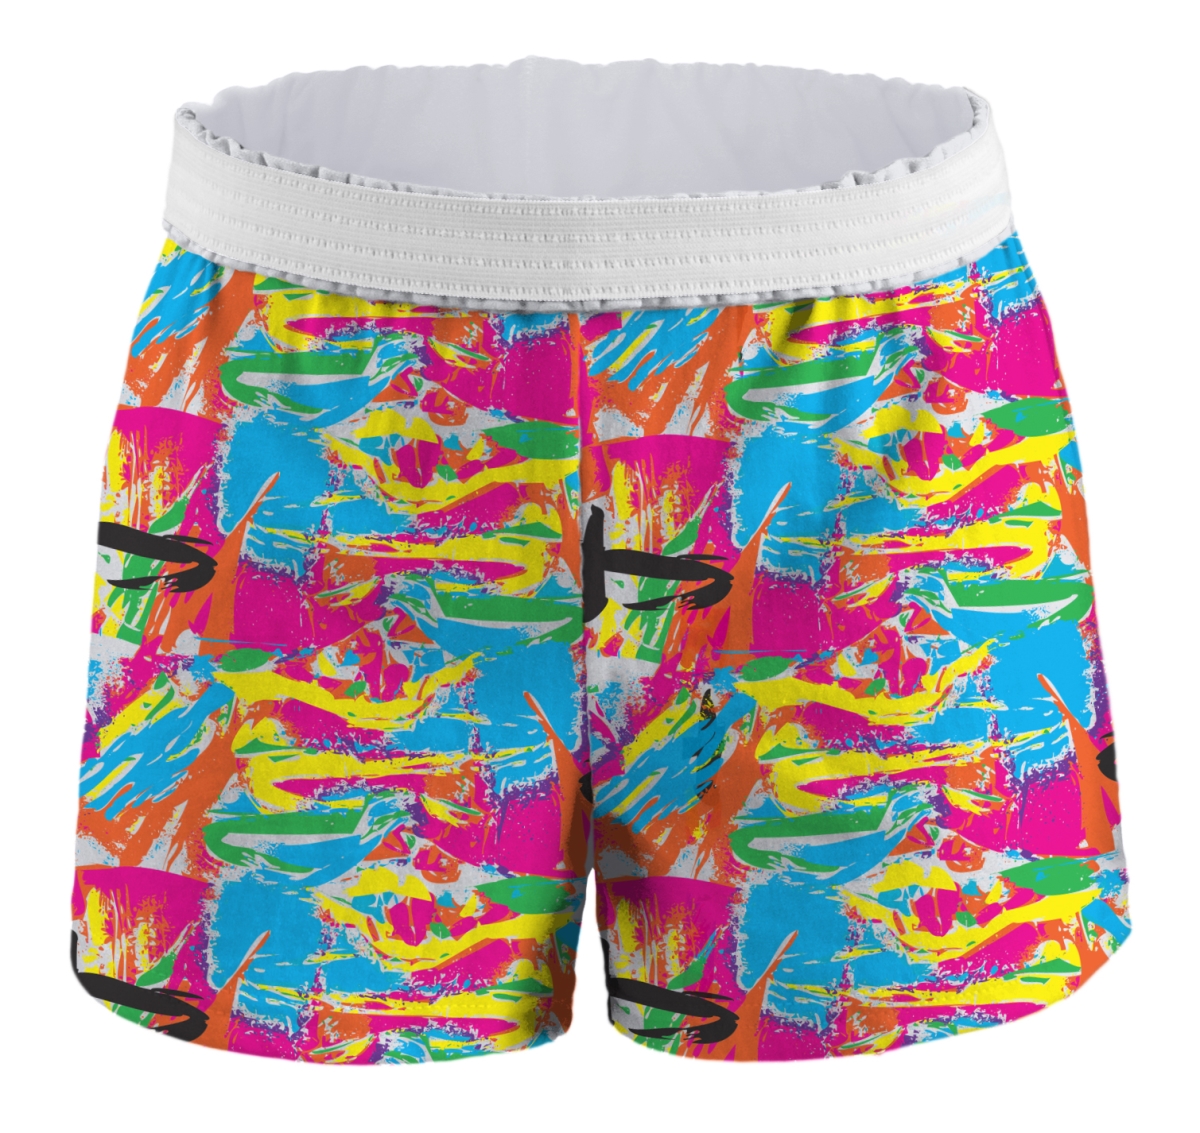 UPC 885537000293 product image for 37G958XSM Printed Combed Cotton Shorts for Girl, Neon Paint - Extra Small | upcitemdb.com